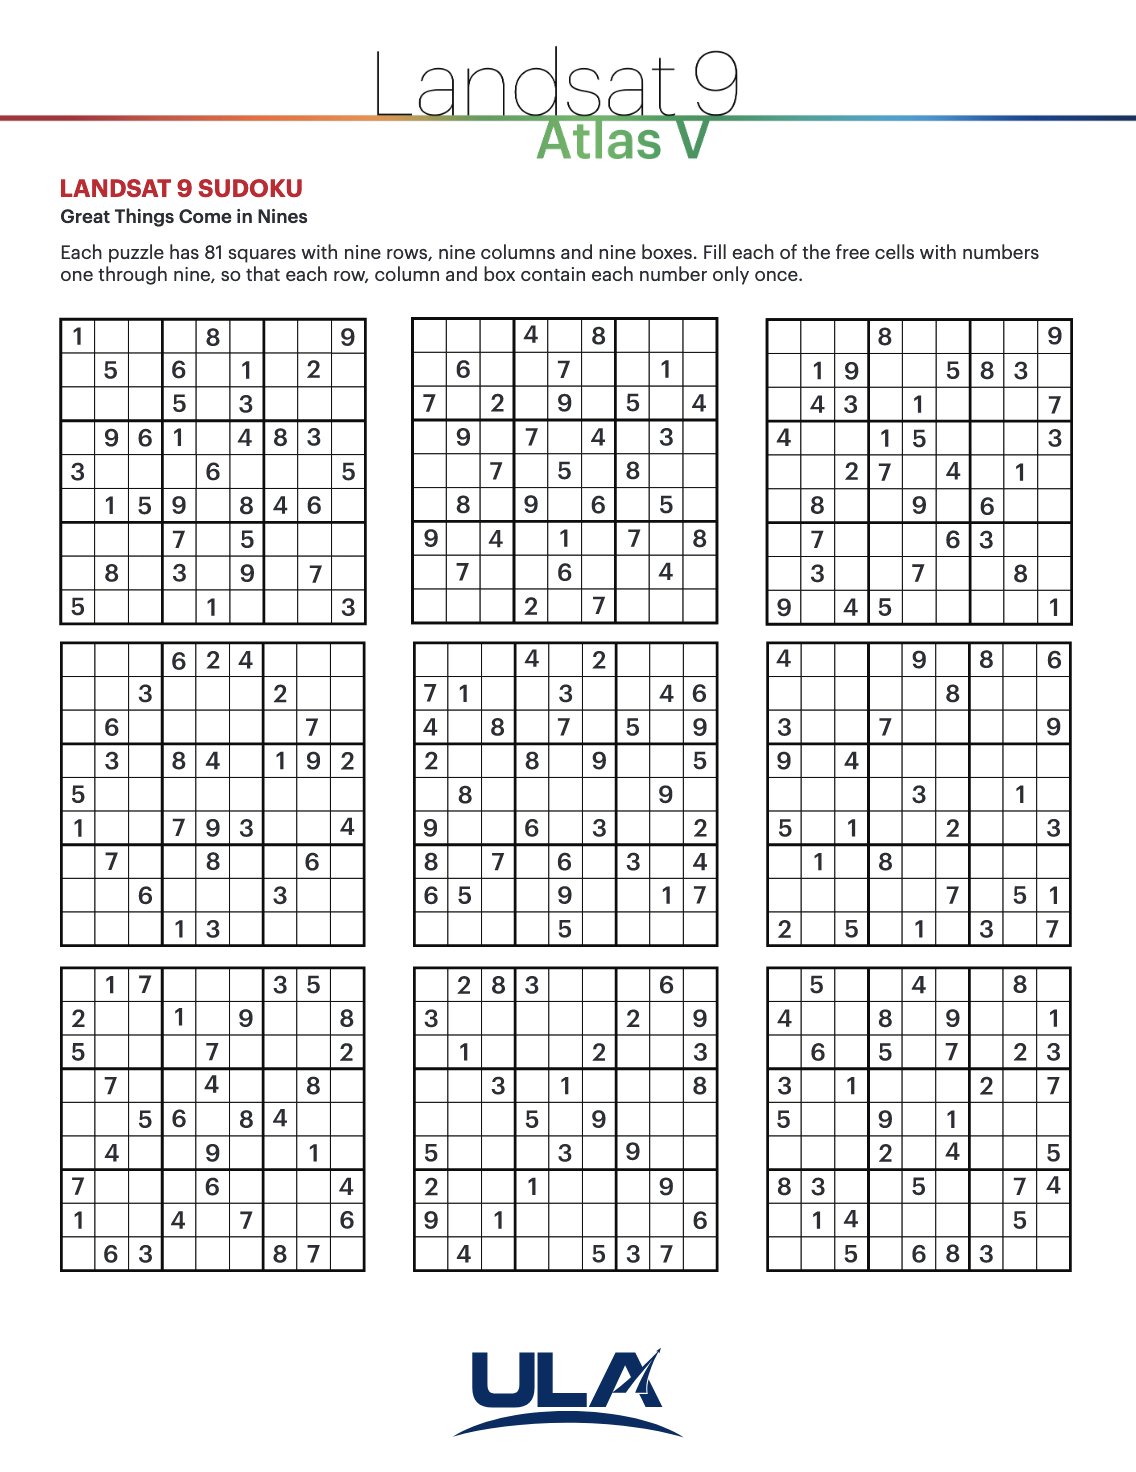 9 poorly composed Sudoku puzzles